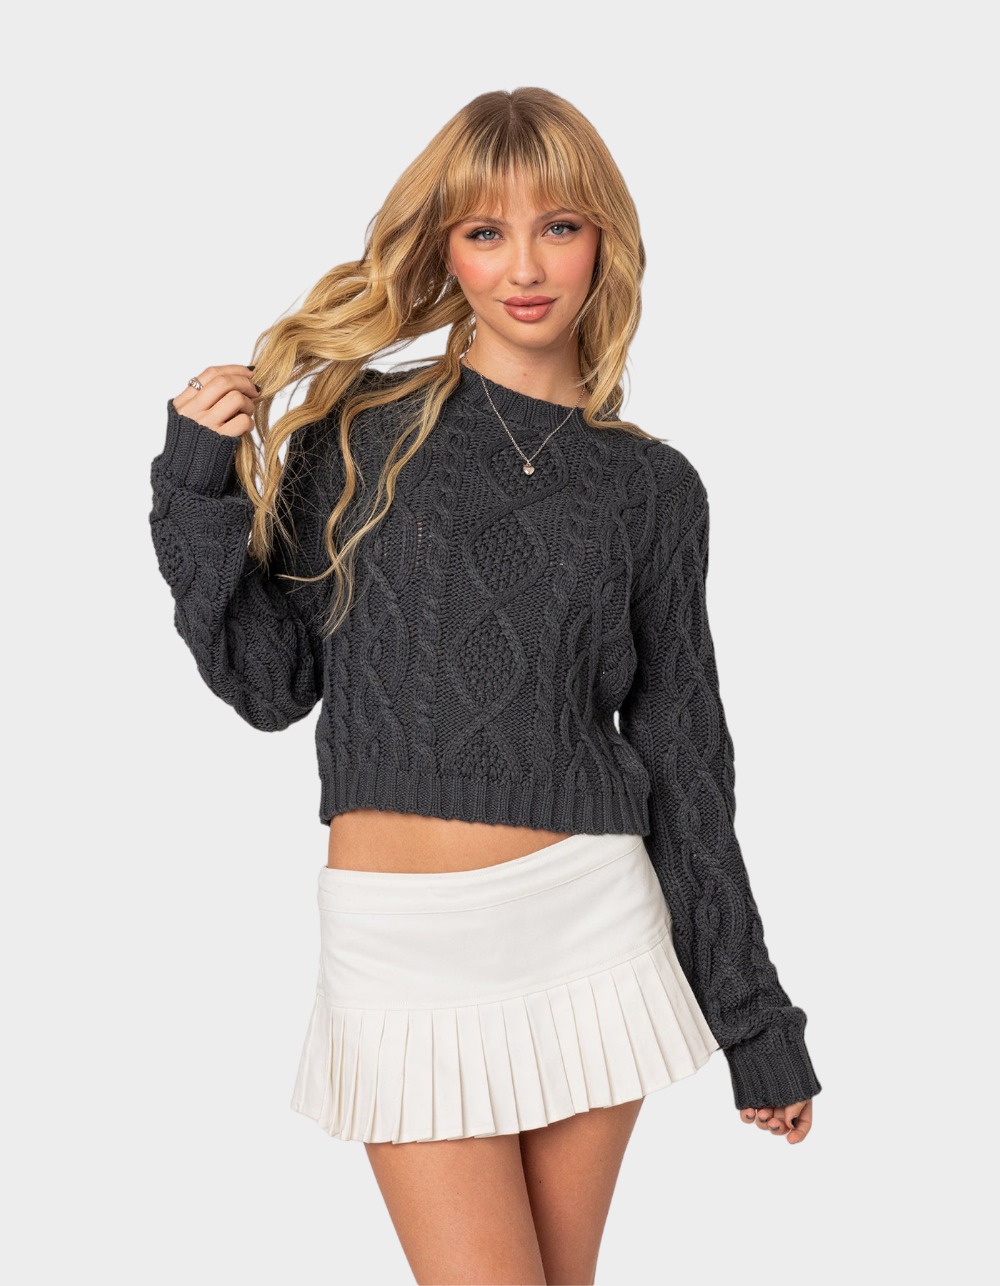 EDIKTED Poppy Cable Knit Sweater